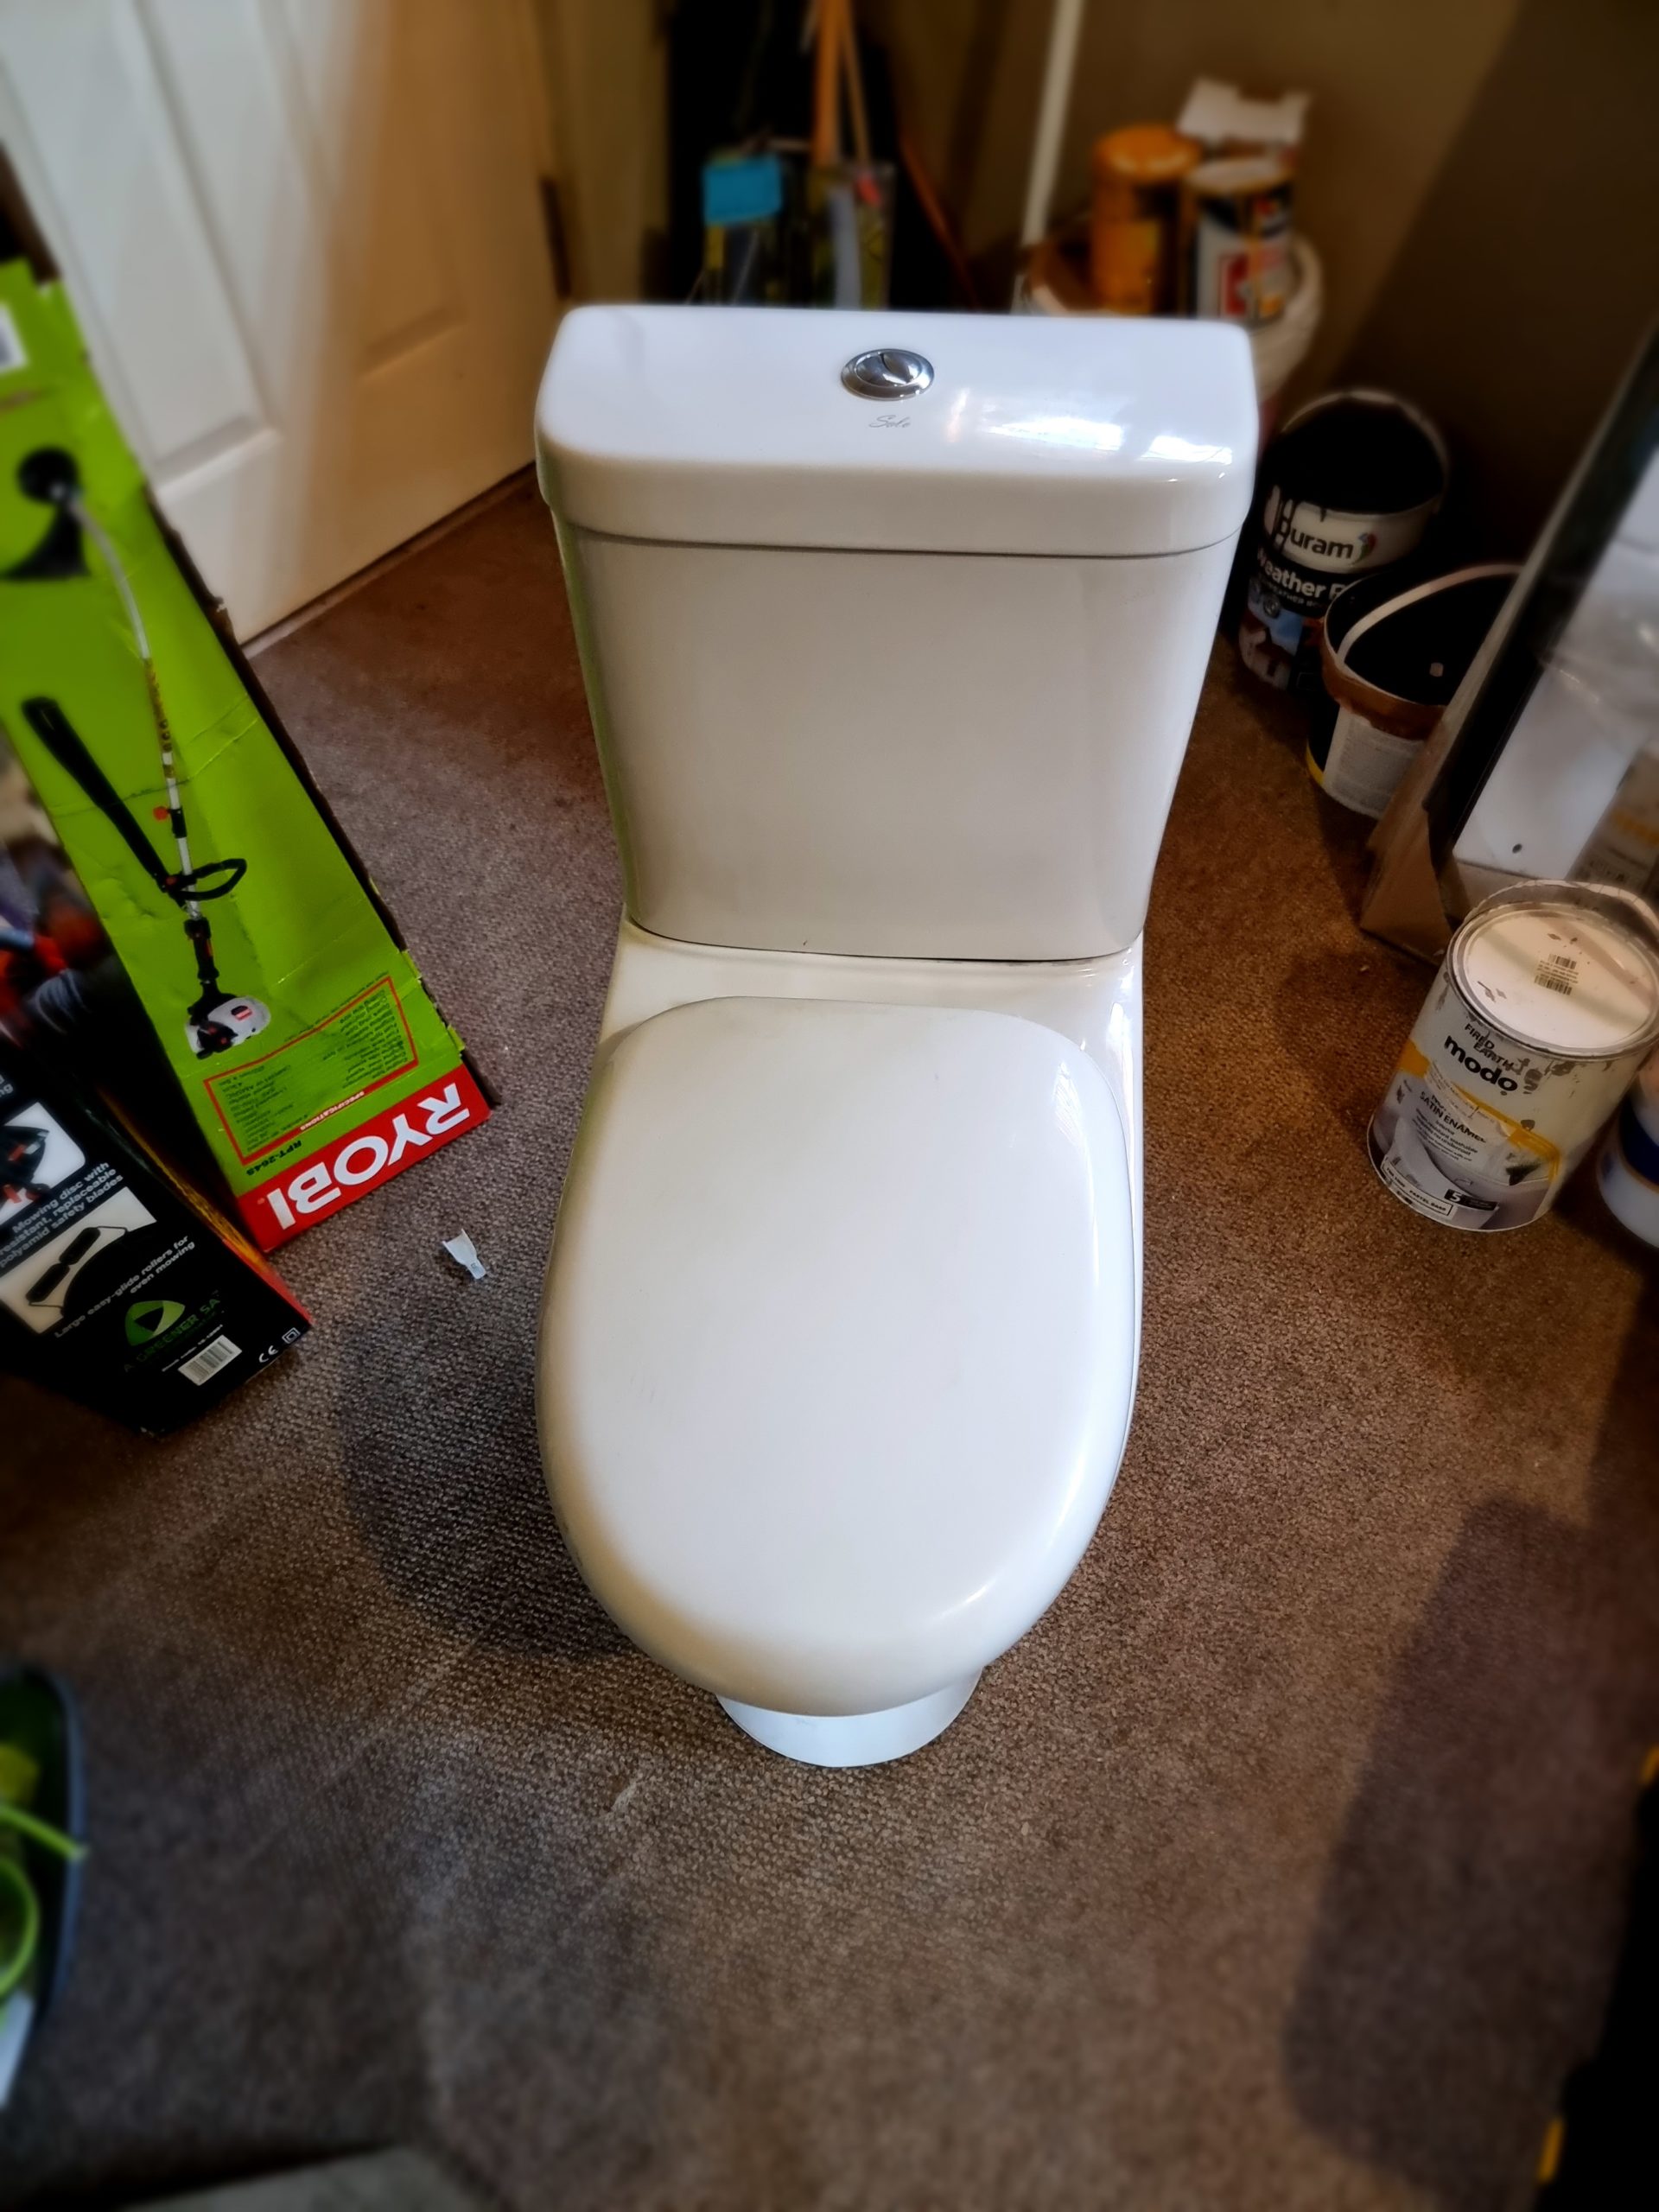 Solo close couple suite kuta top flush – New, Complete toilet, no visible damage, seems complete, not tested